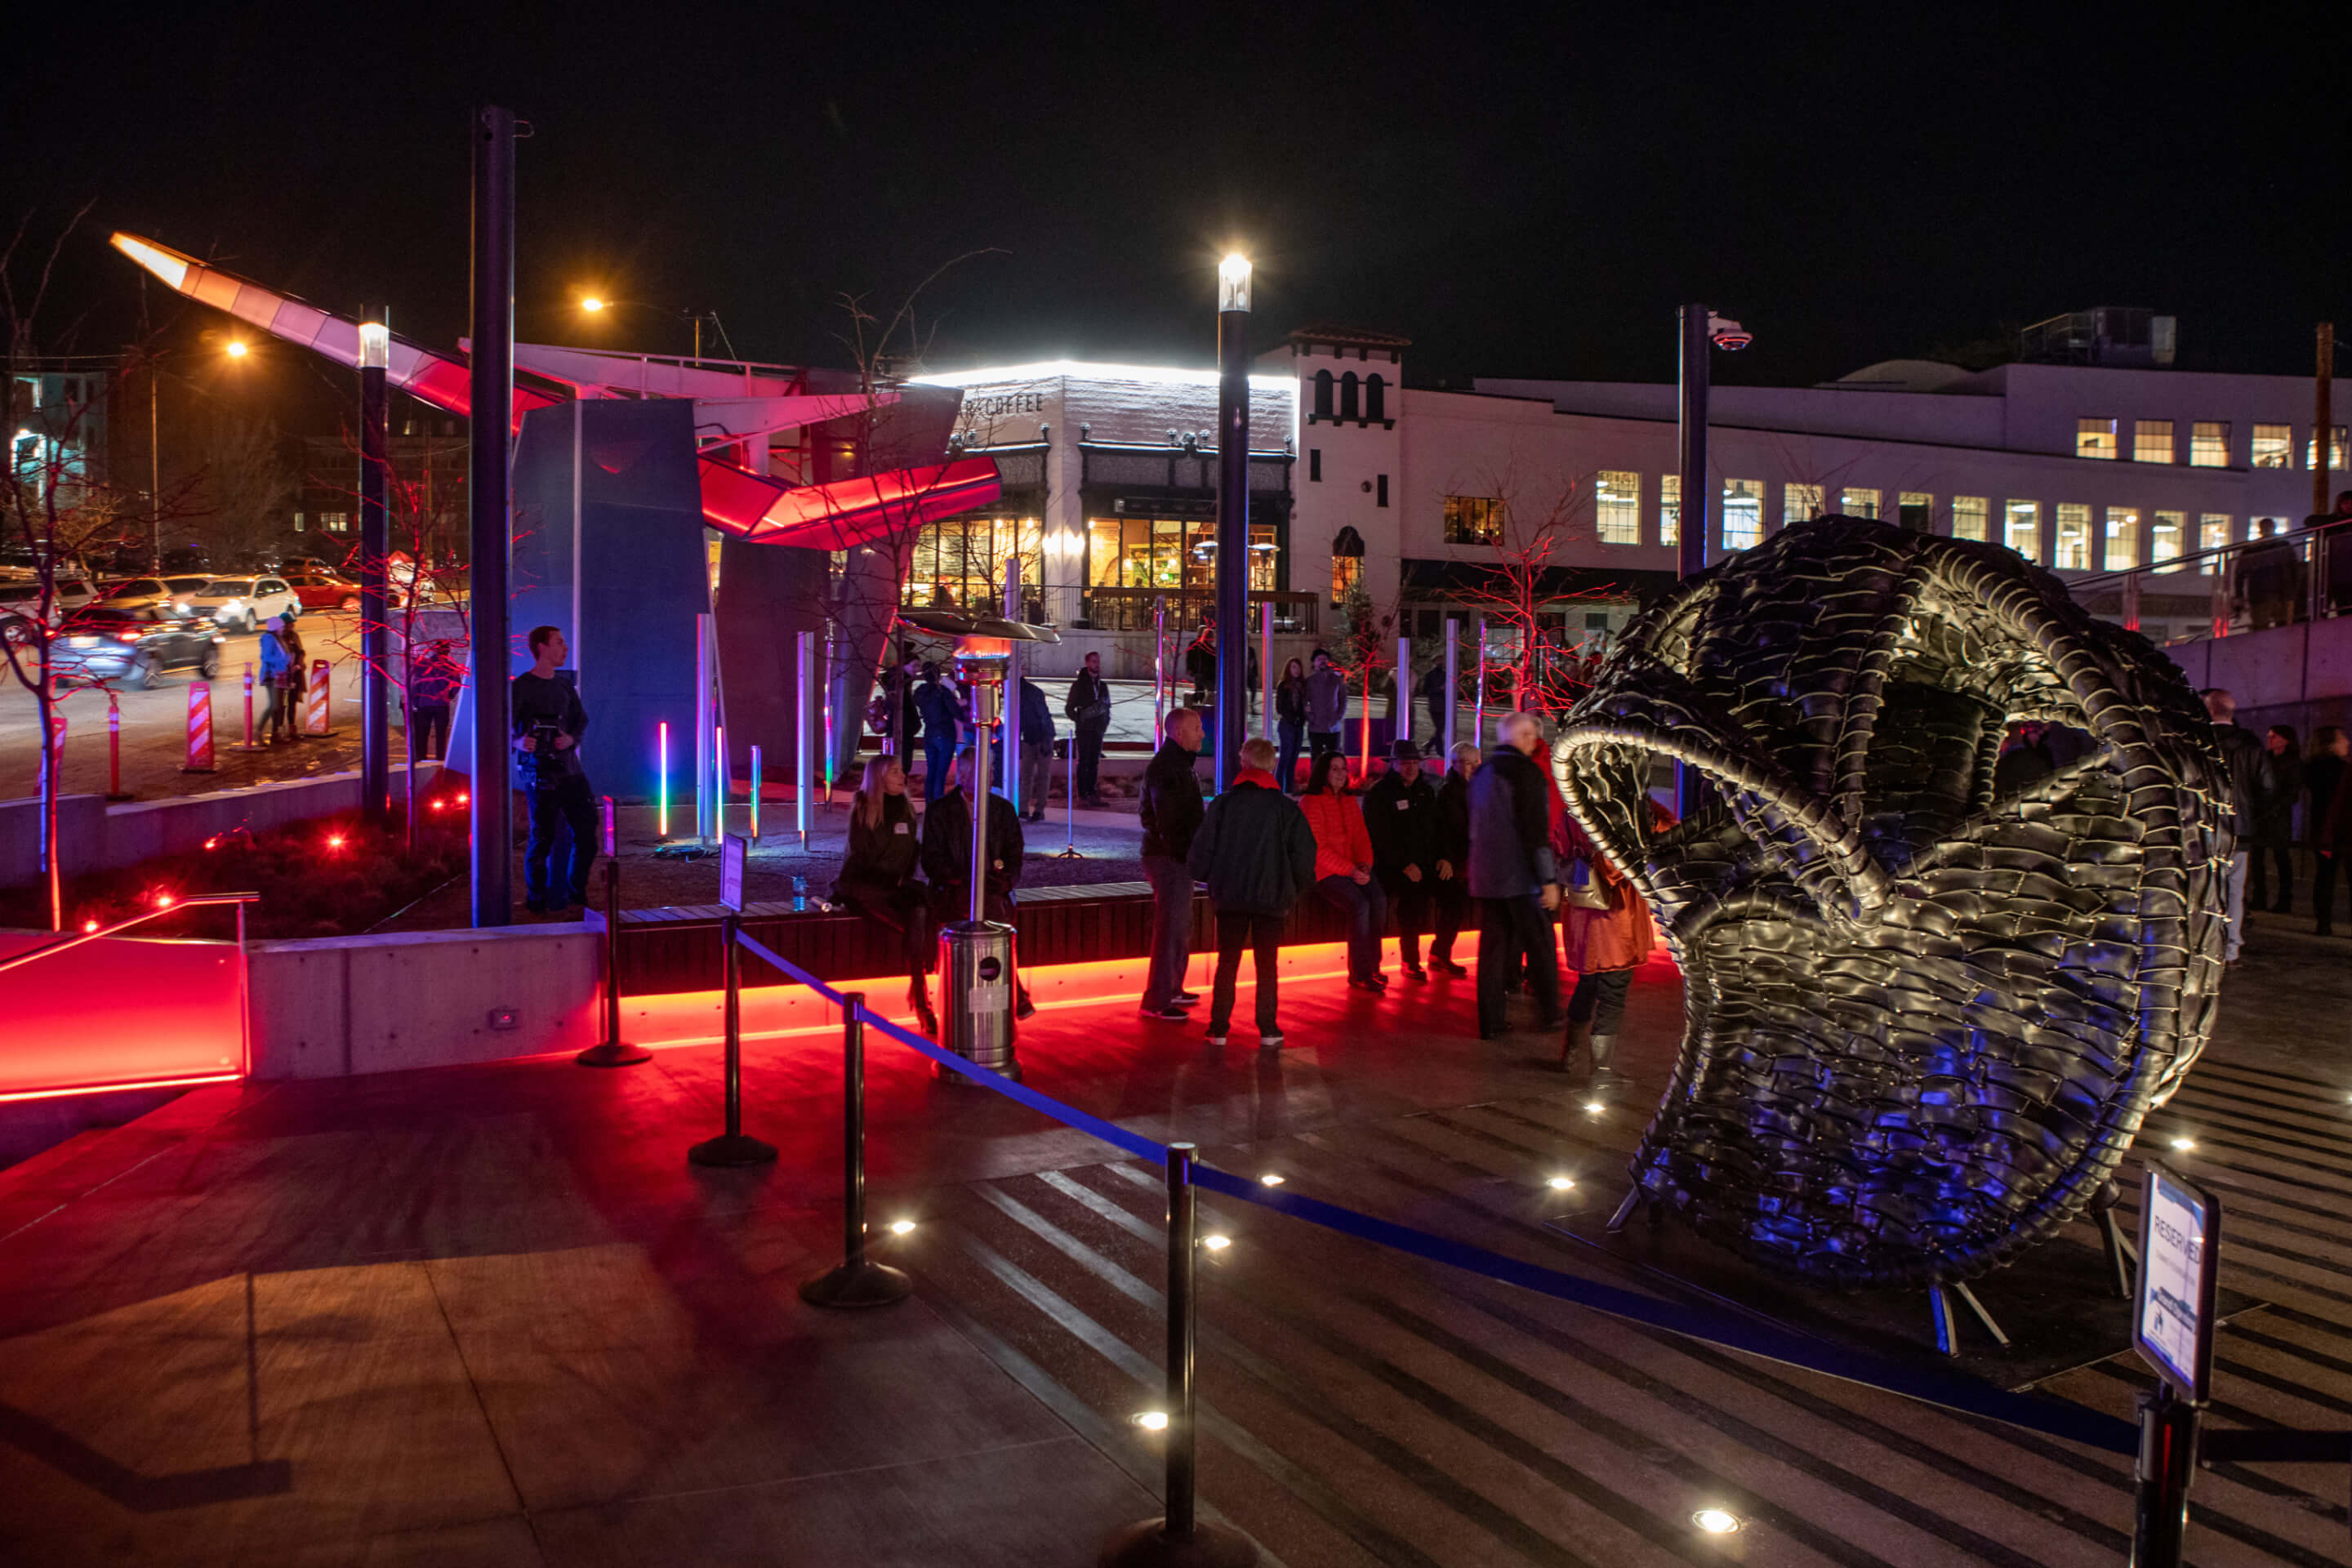 an arts plaza with sculptures and purple lighting